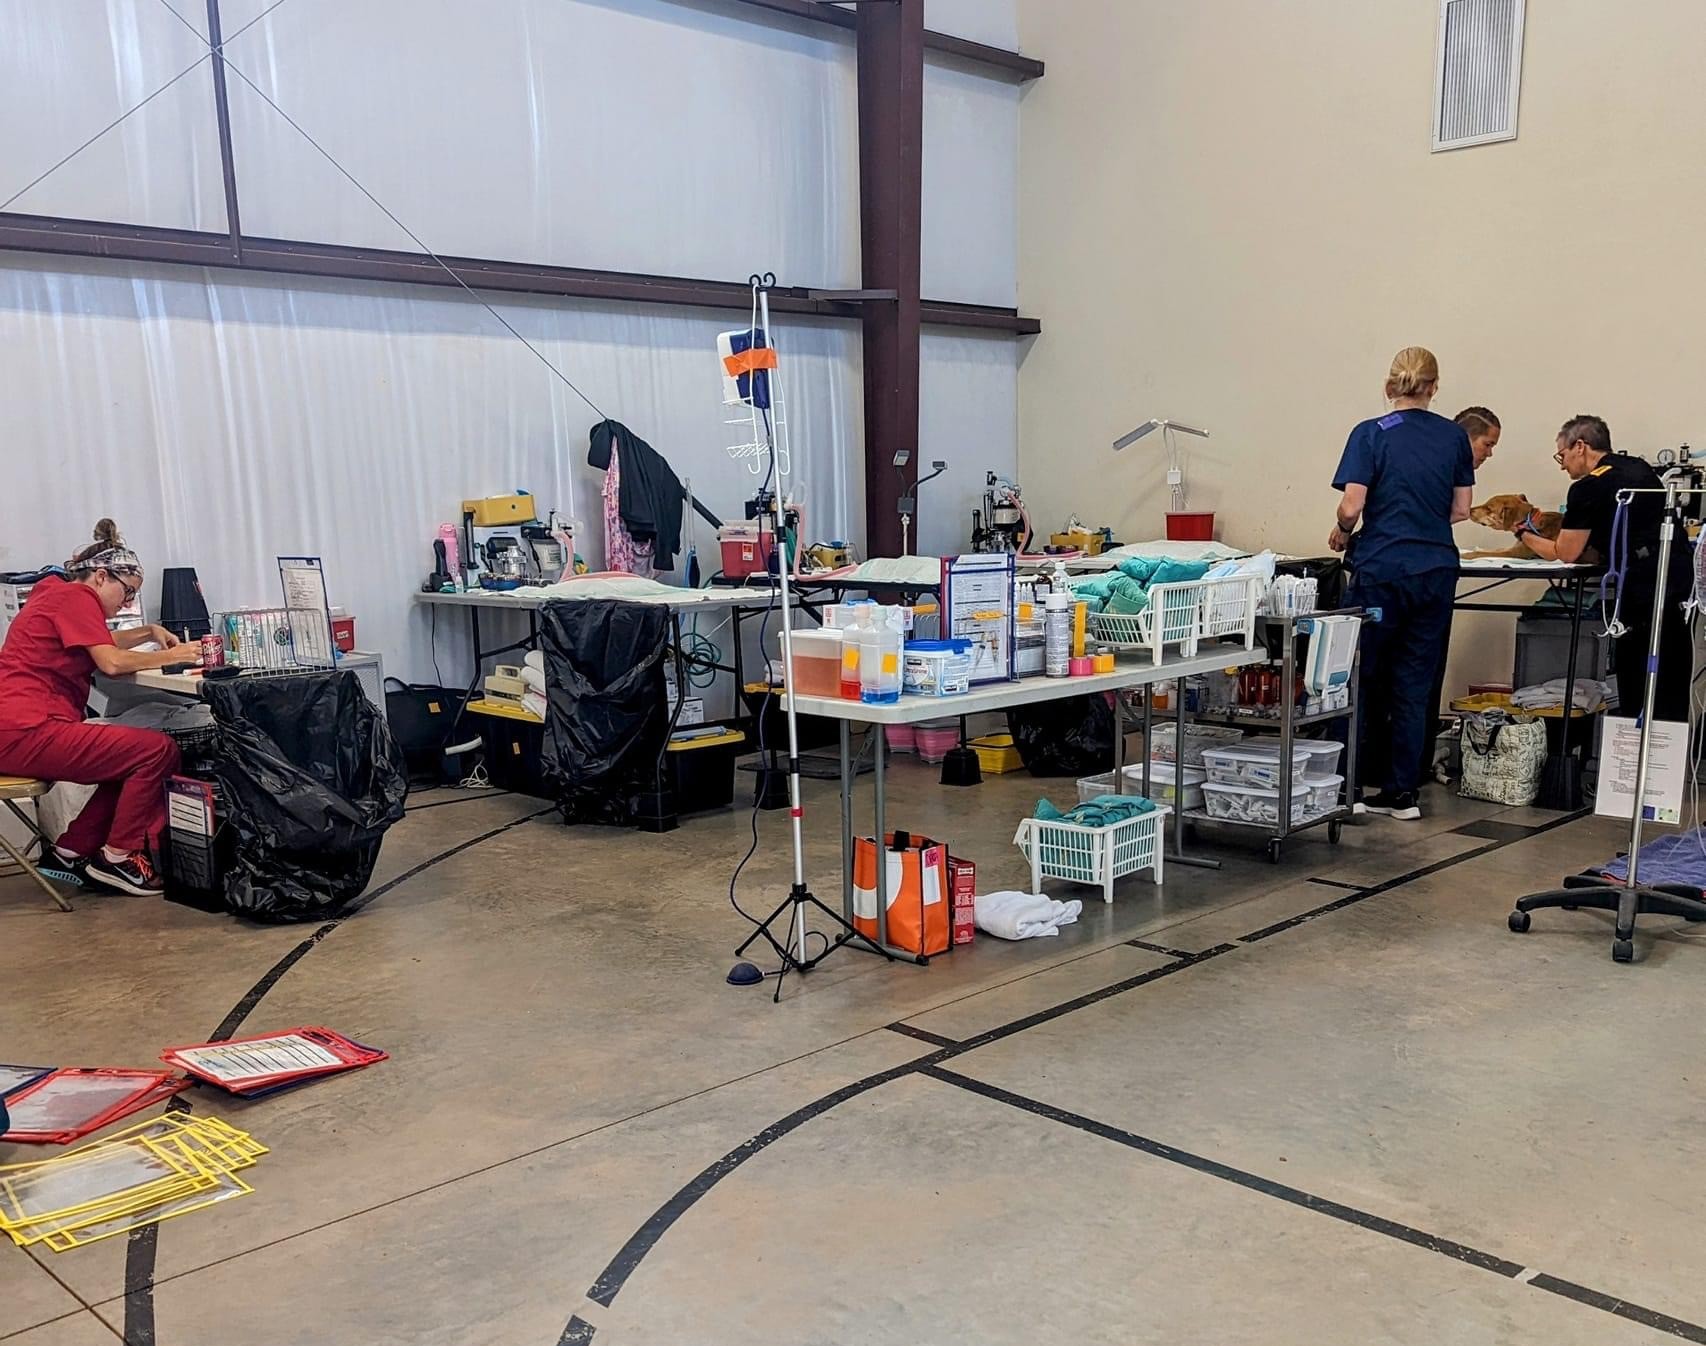 The volunteer mobile veterinary clinic set up in a gymnasium.